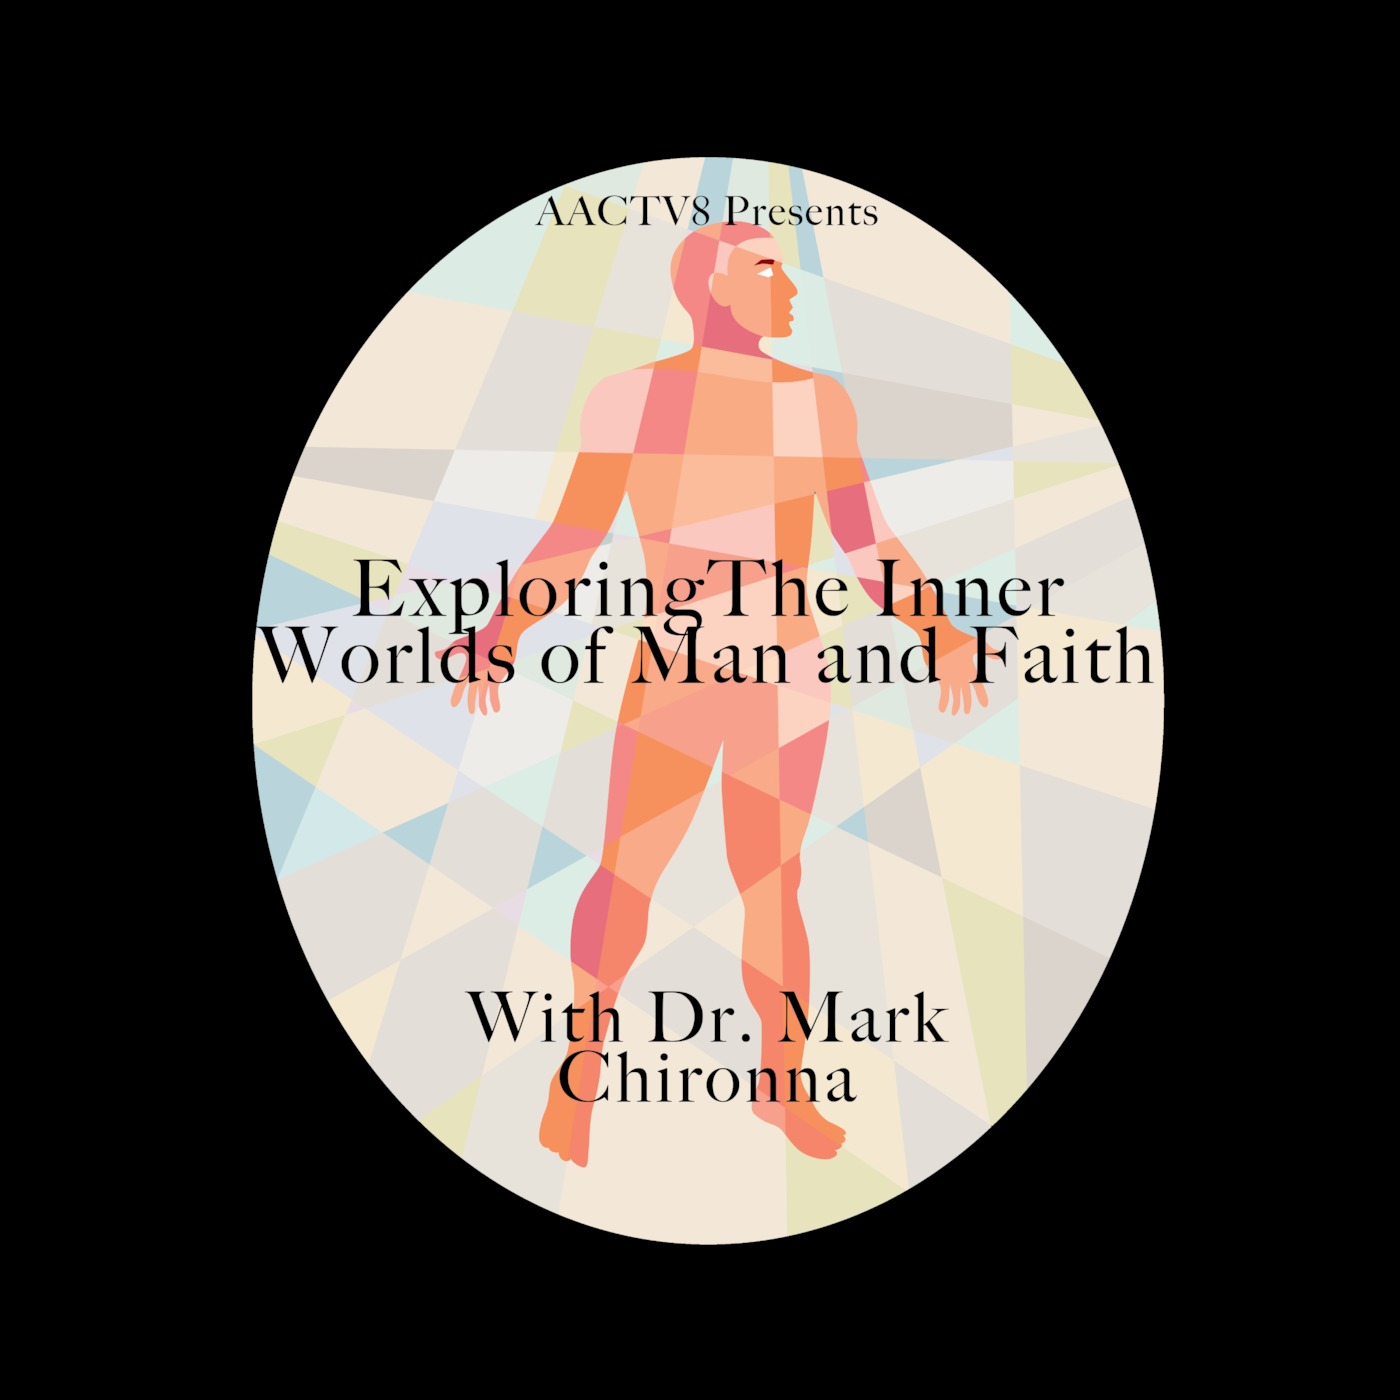 ExploringThe Inner Worlds of Man and Faith with Dr. Mark Chironna